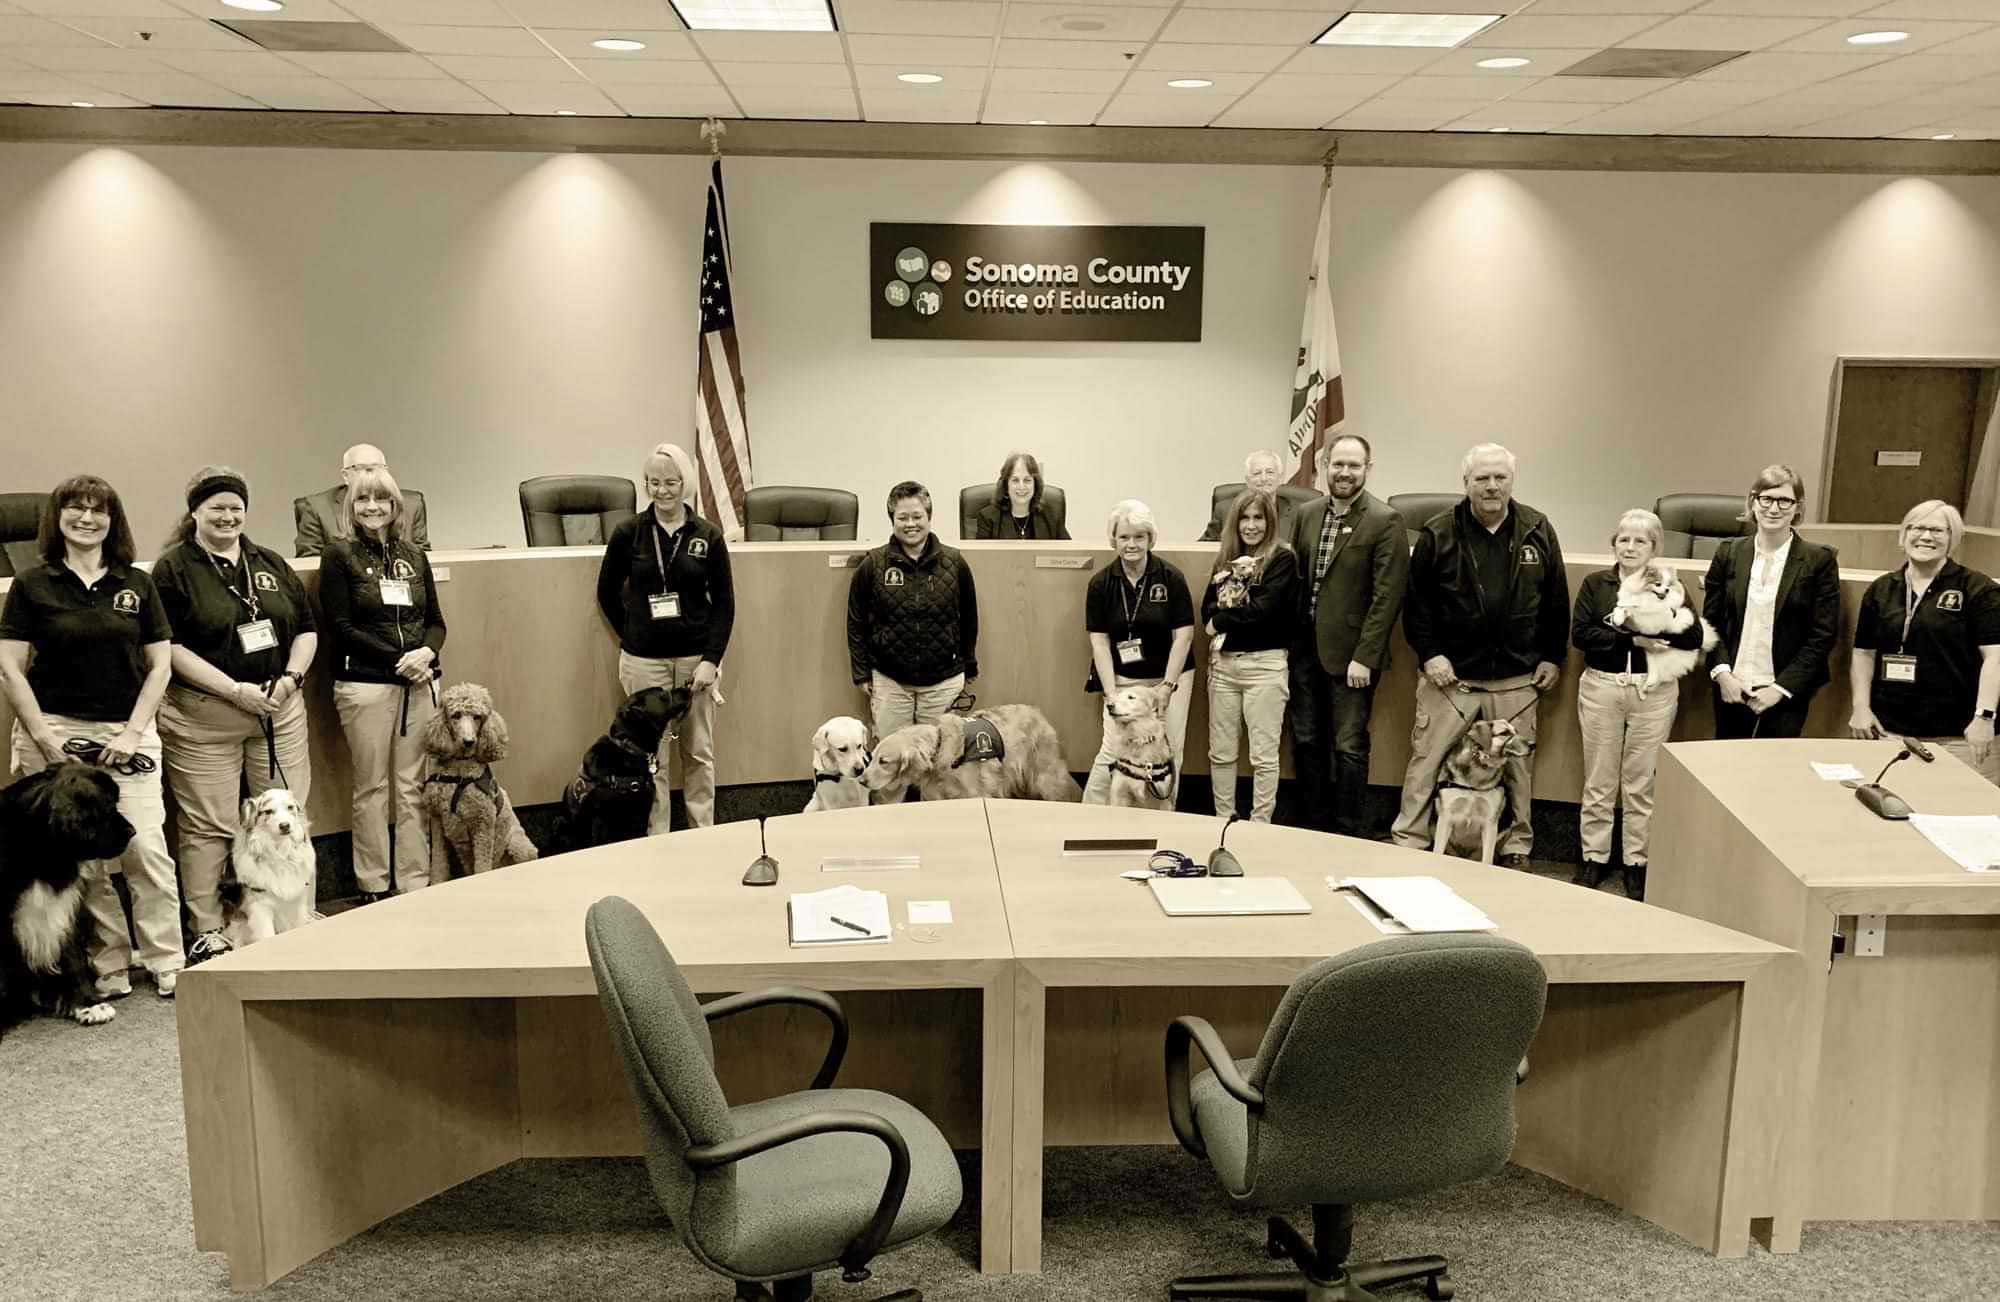 emotional support dogs and their attendants stand at the head of a conference room for a group photo